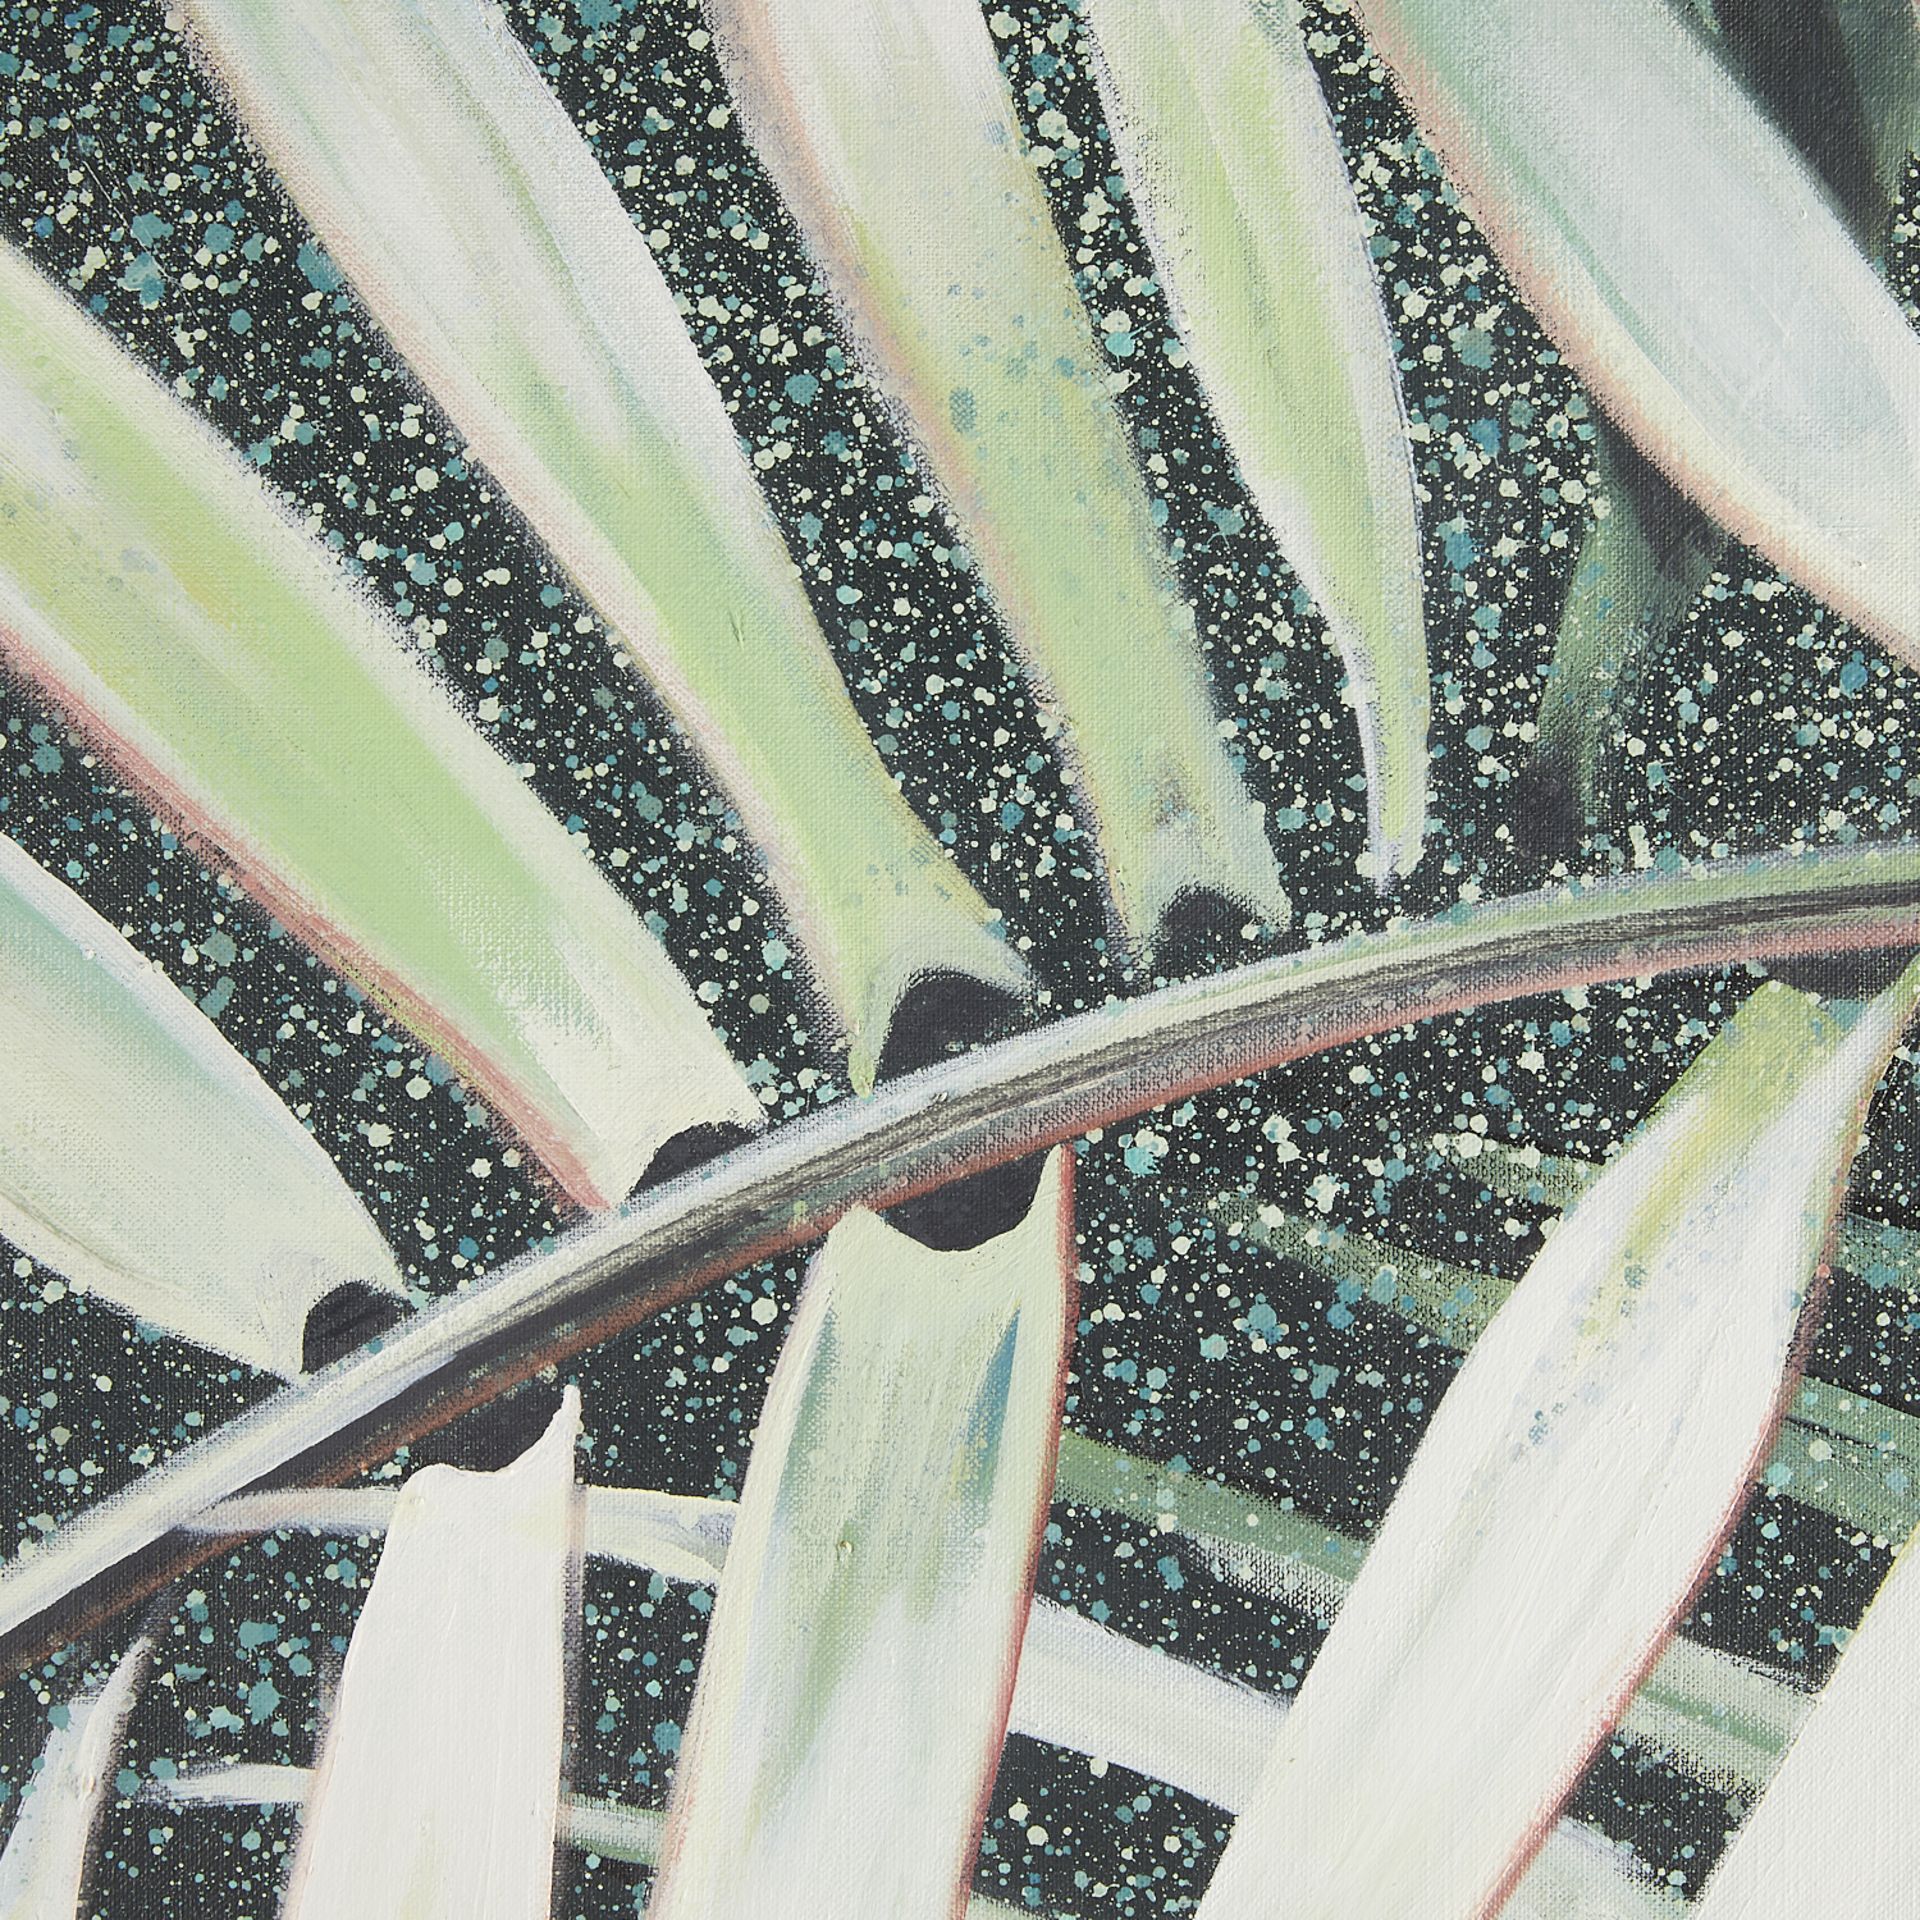 Lowell Nesbitt "Jungle Lily" Oil on Canvas 1987 - Image 4 of 6